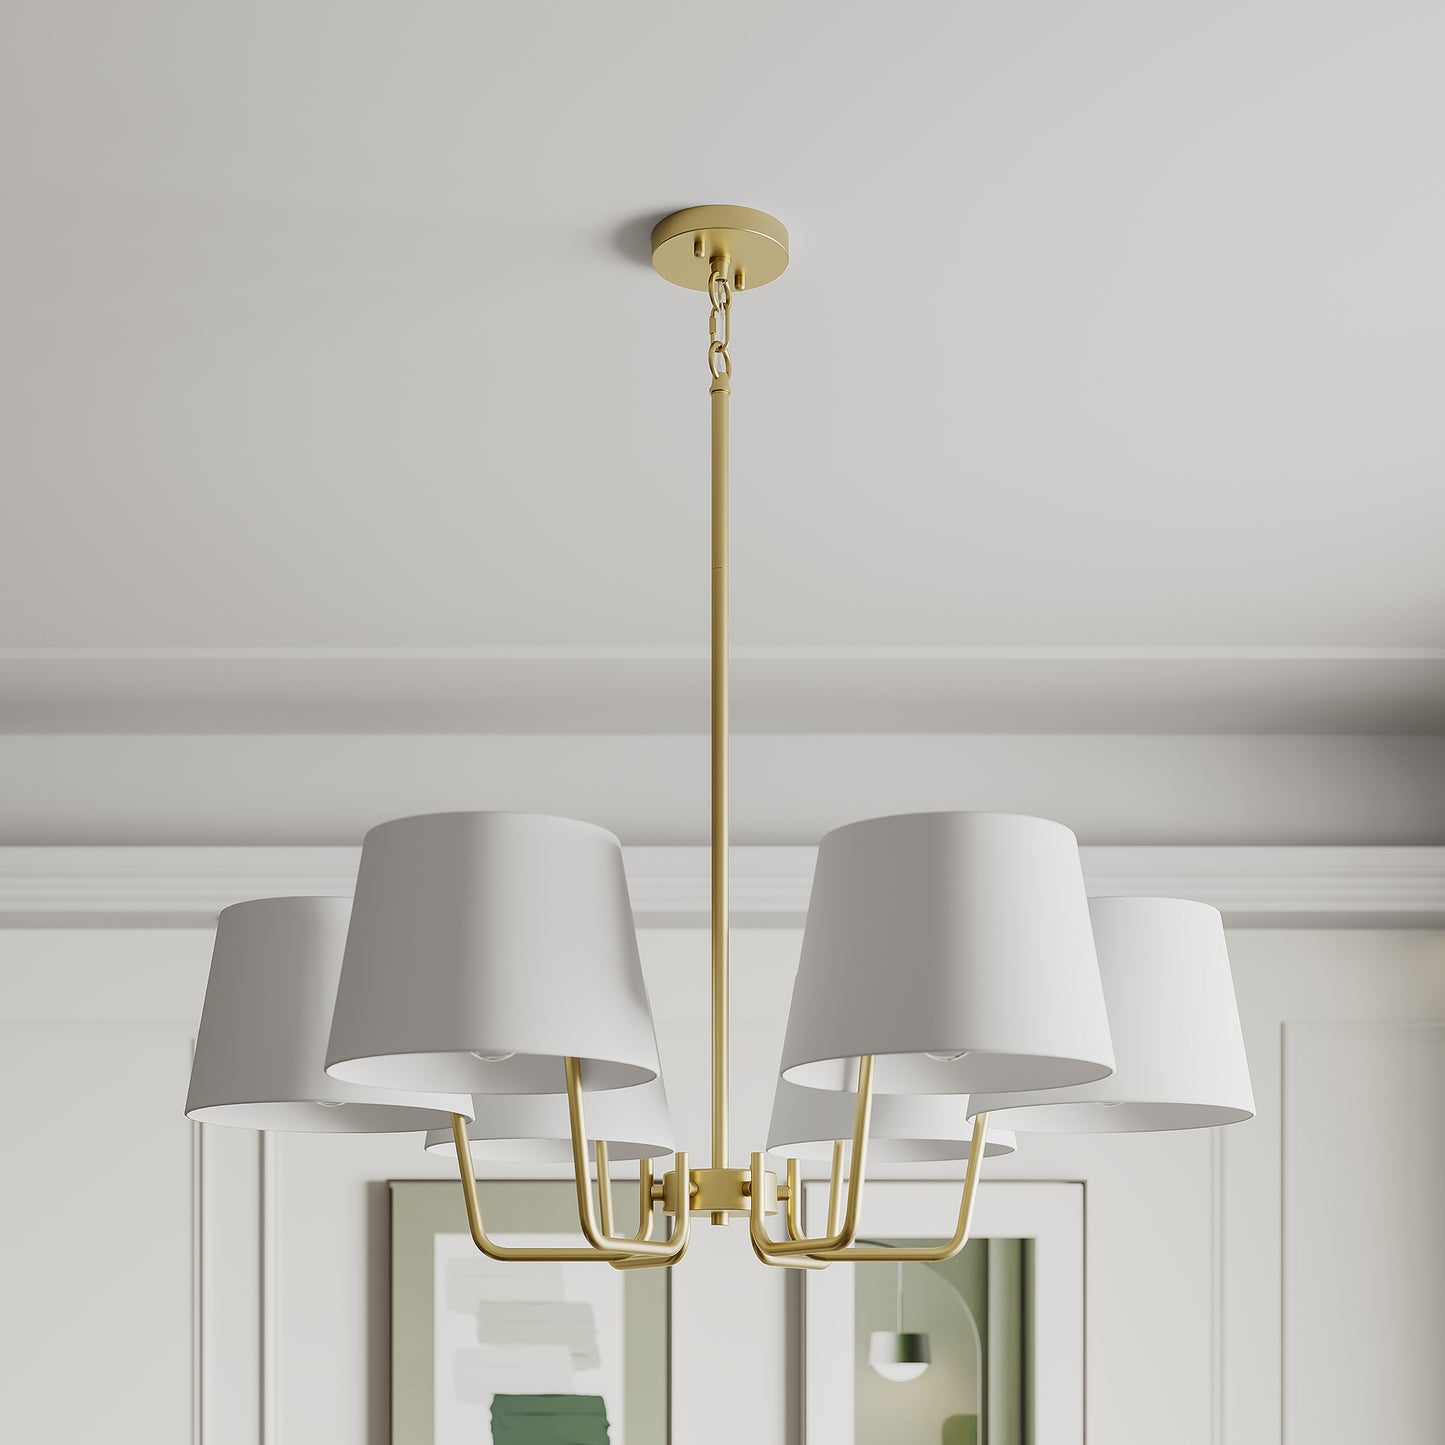 6 light classic traditional chandelier (1) by ACROMA